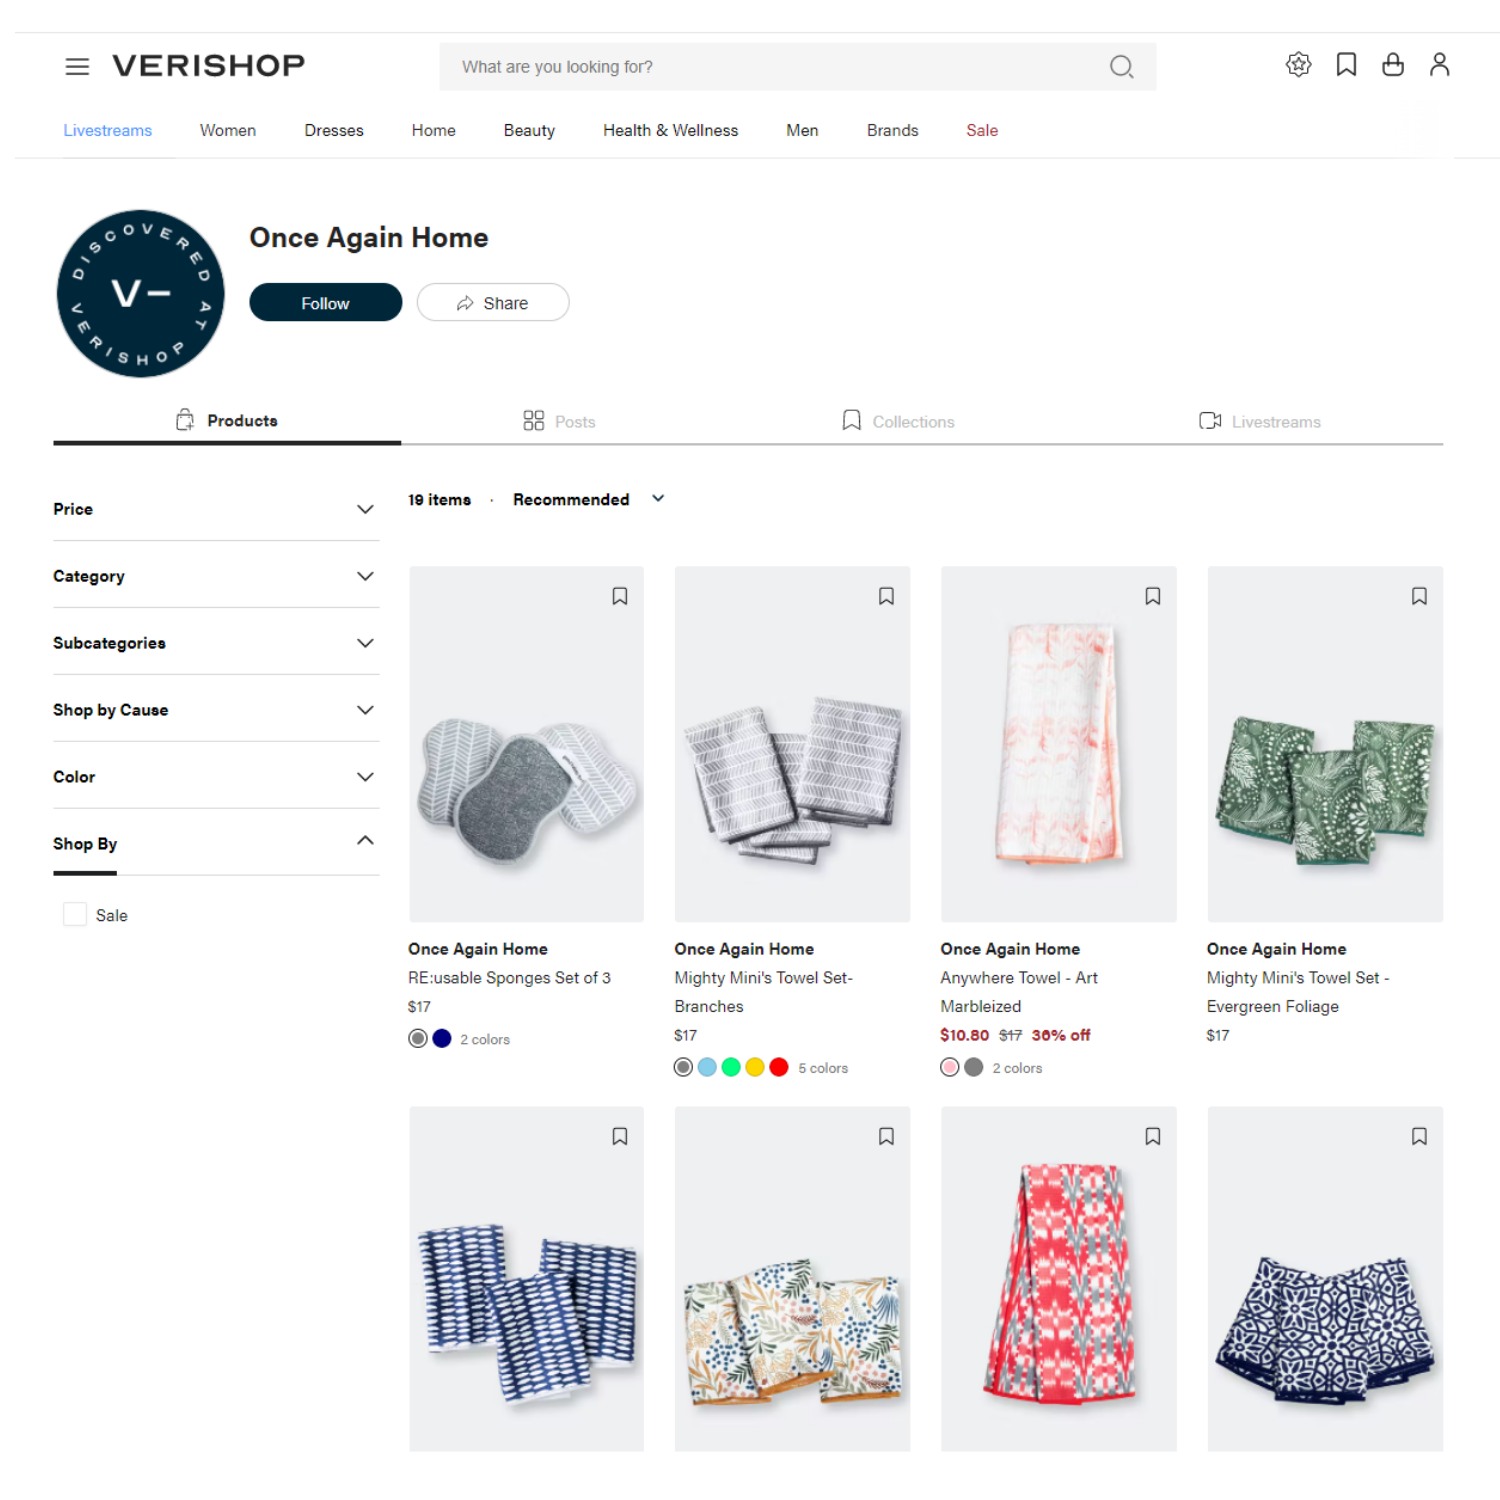 Check us out on Verishop